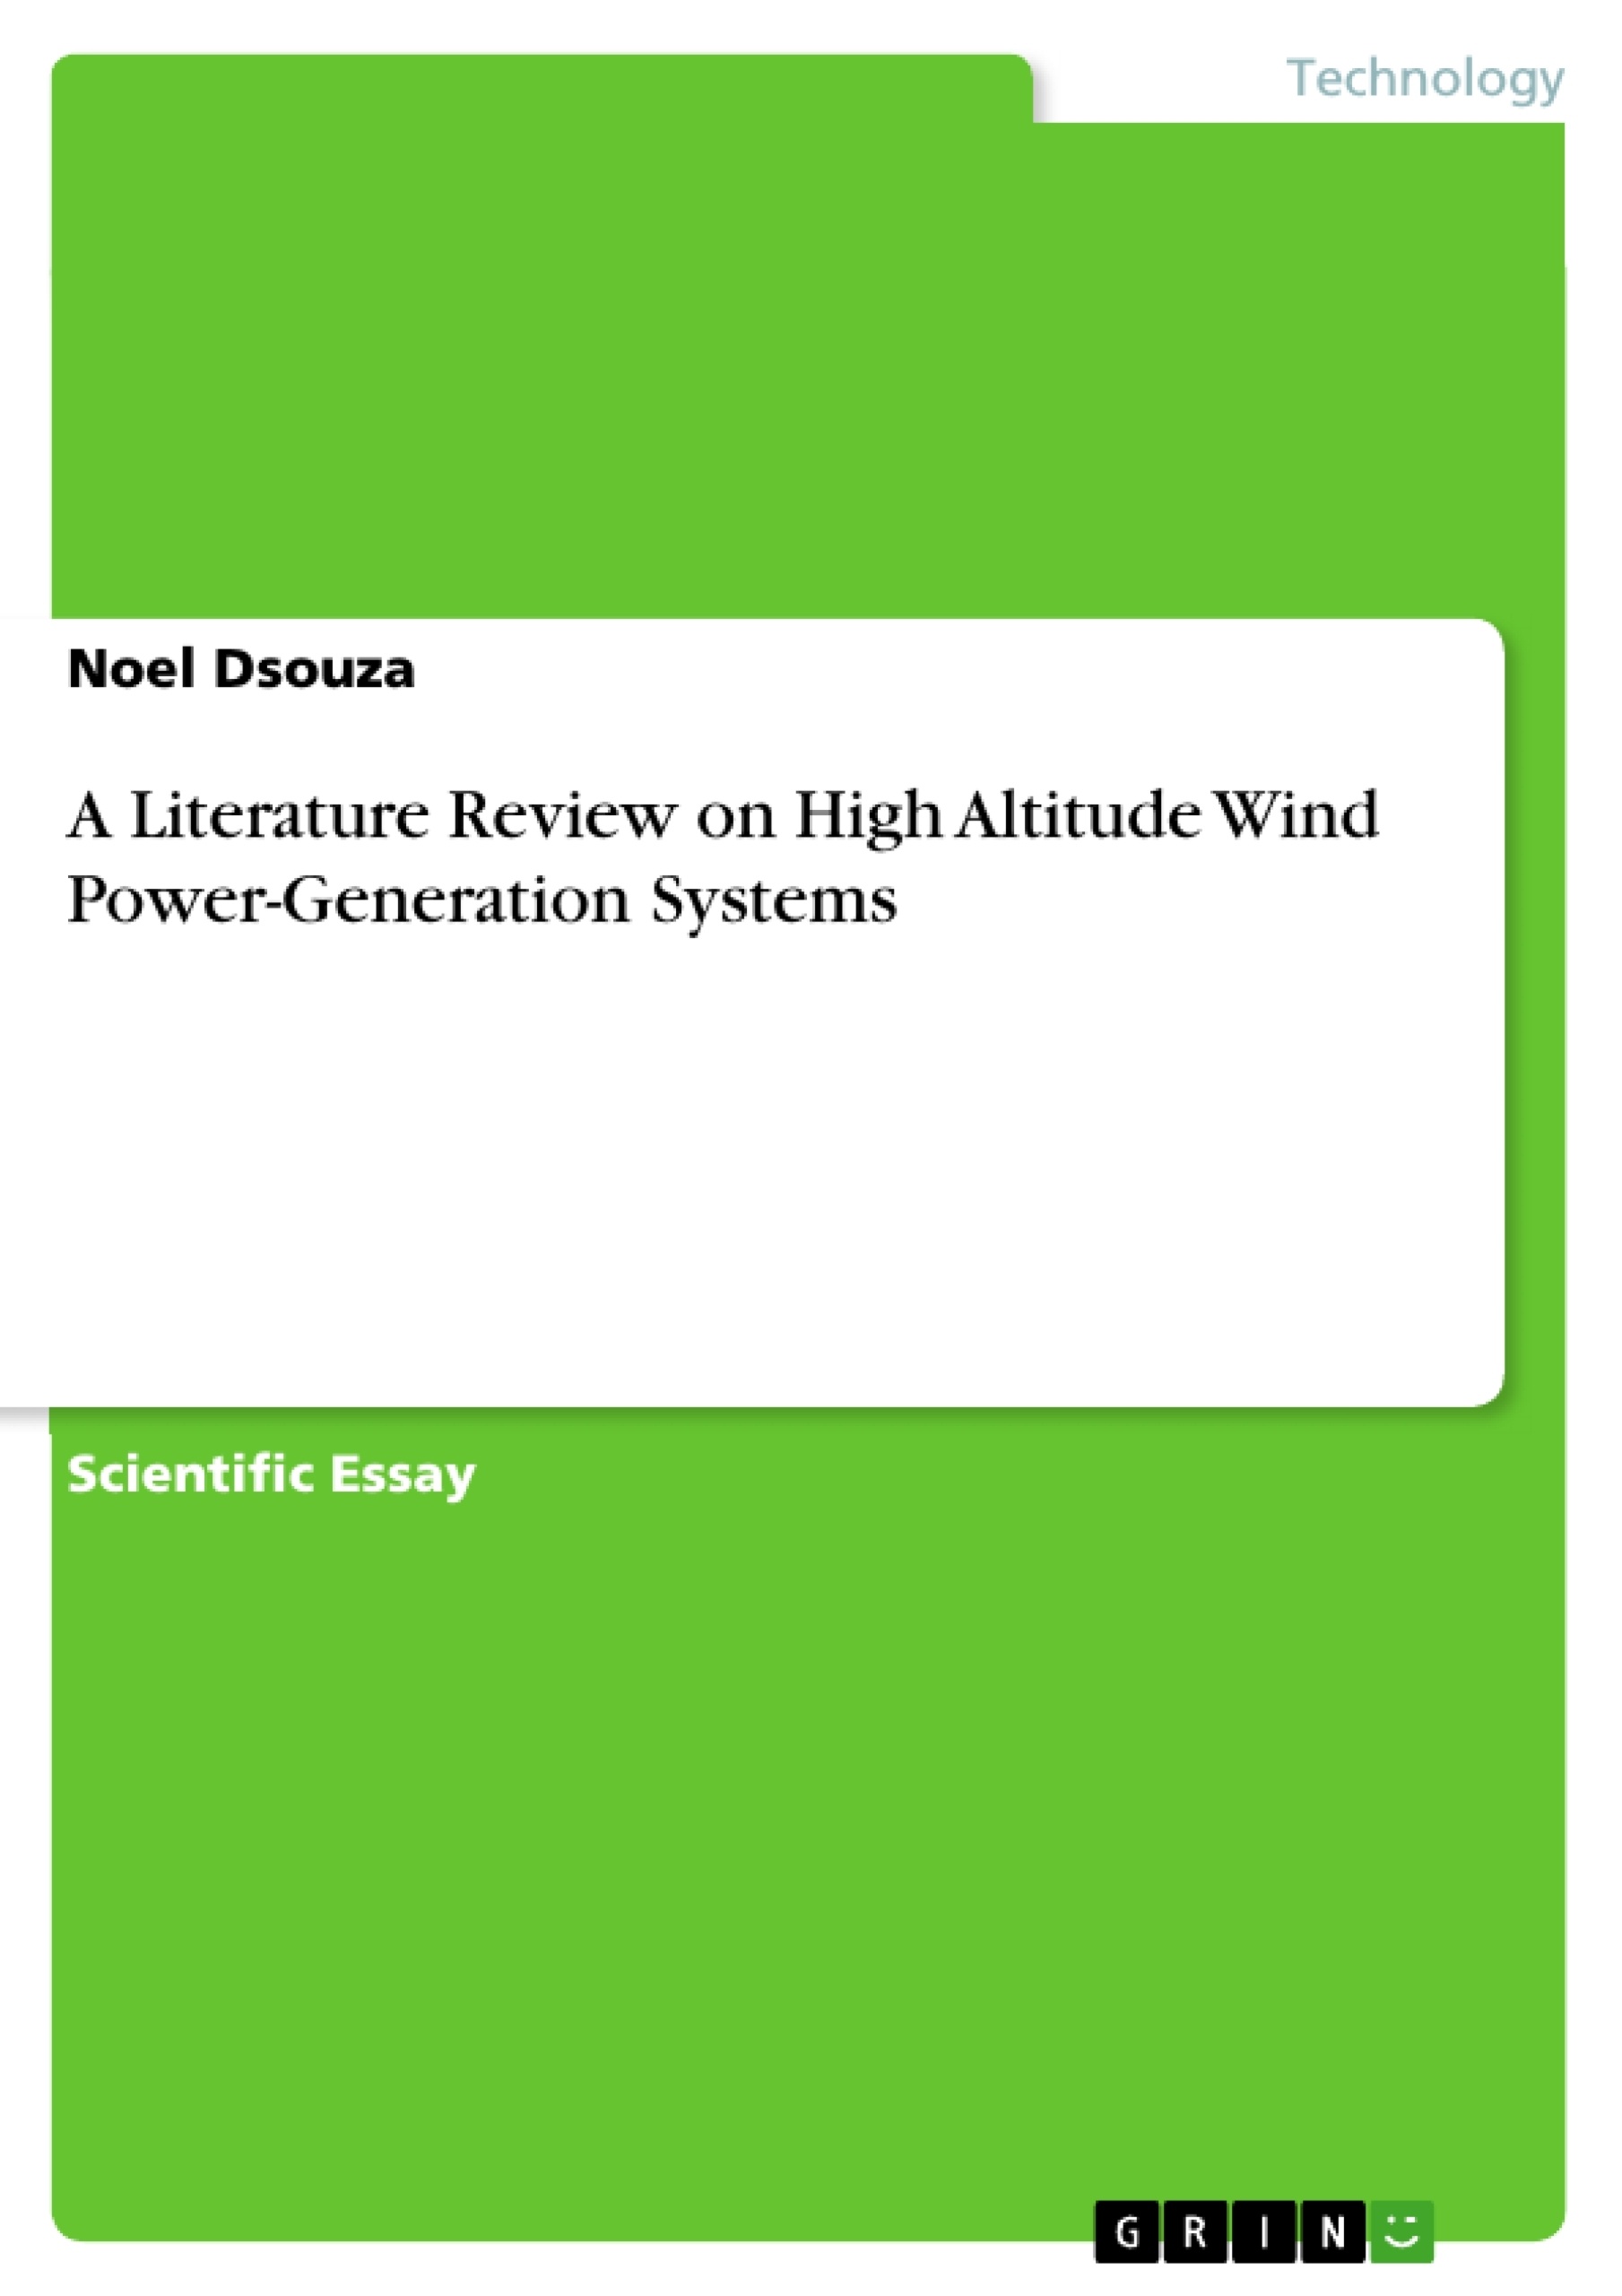 Título: A Literature Review on High Altitude Wind Power-Generation Systems